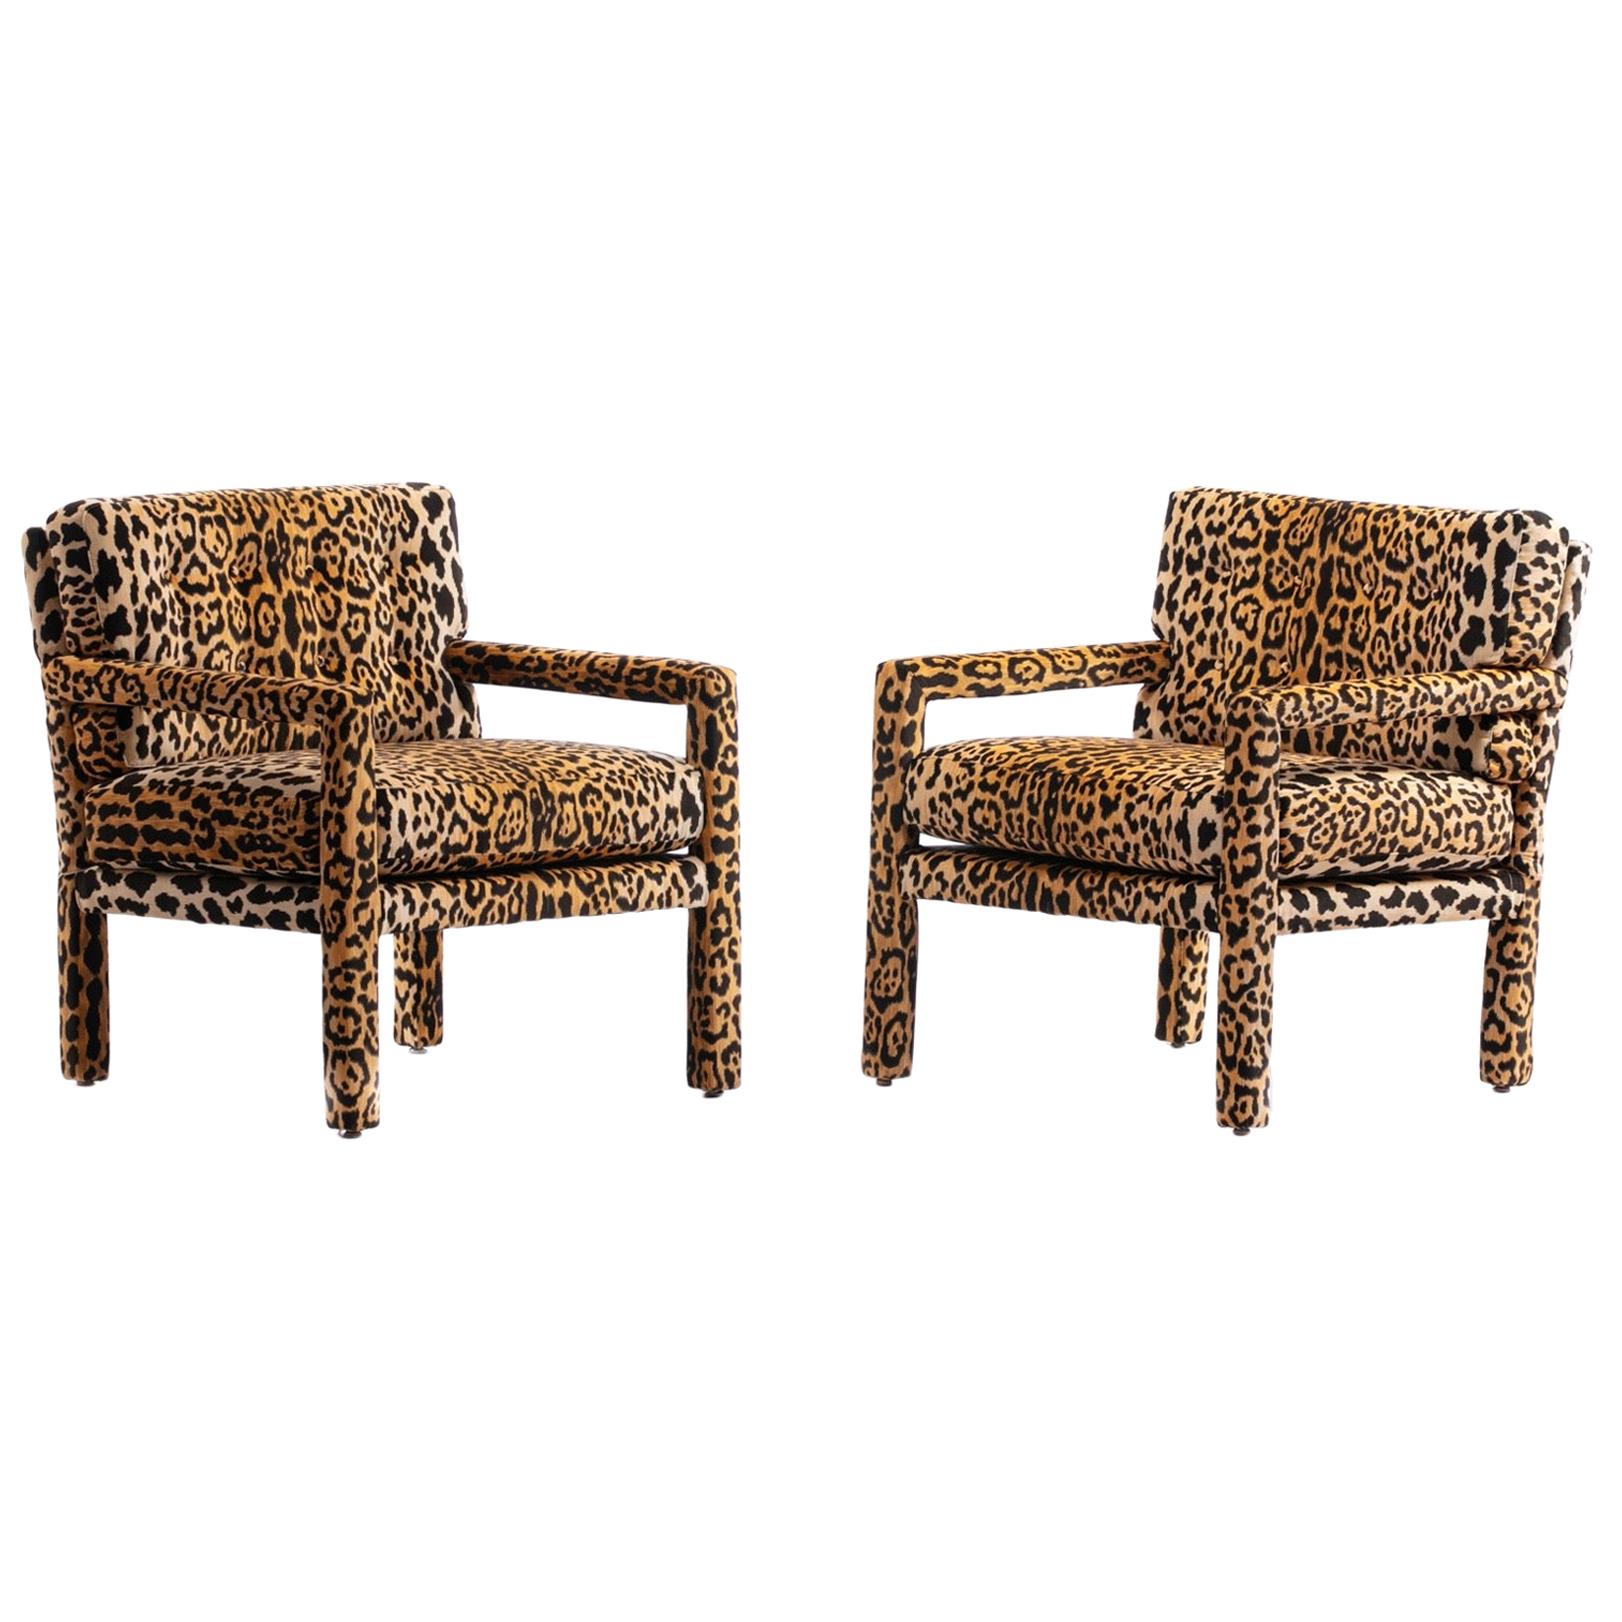 Picture perfect aren't they? And wait until they envelop you in leopard velvet. Timeless Milo Baughman style Parsons design freshly reupholstered with forever sexy and stylish leopard velvet. Parsons chairs are unique in that every surface is